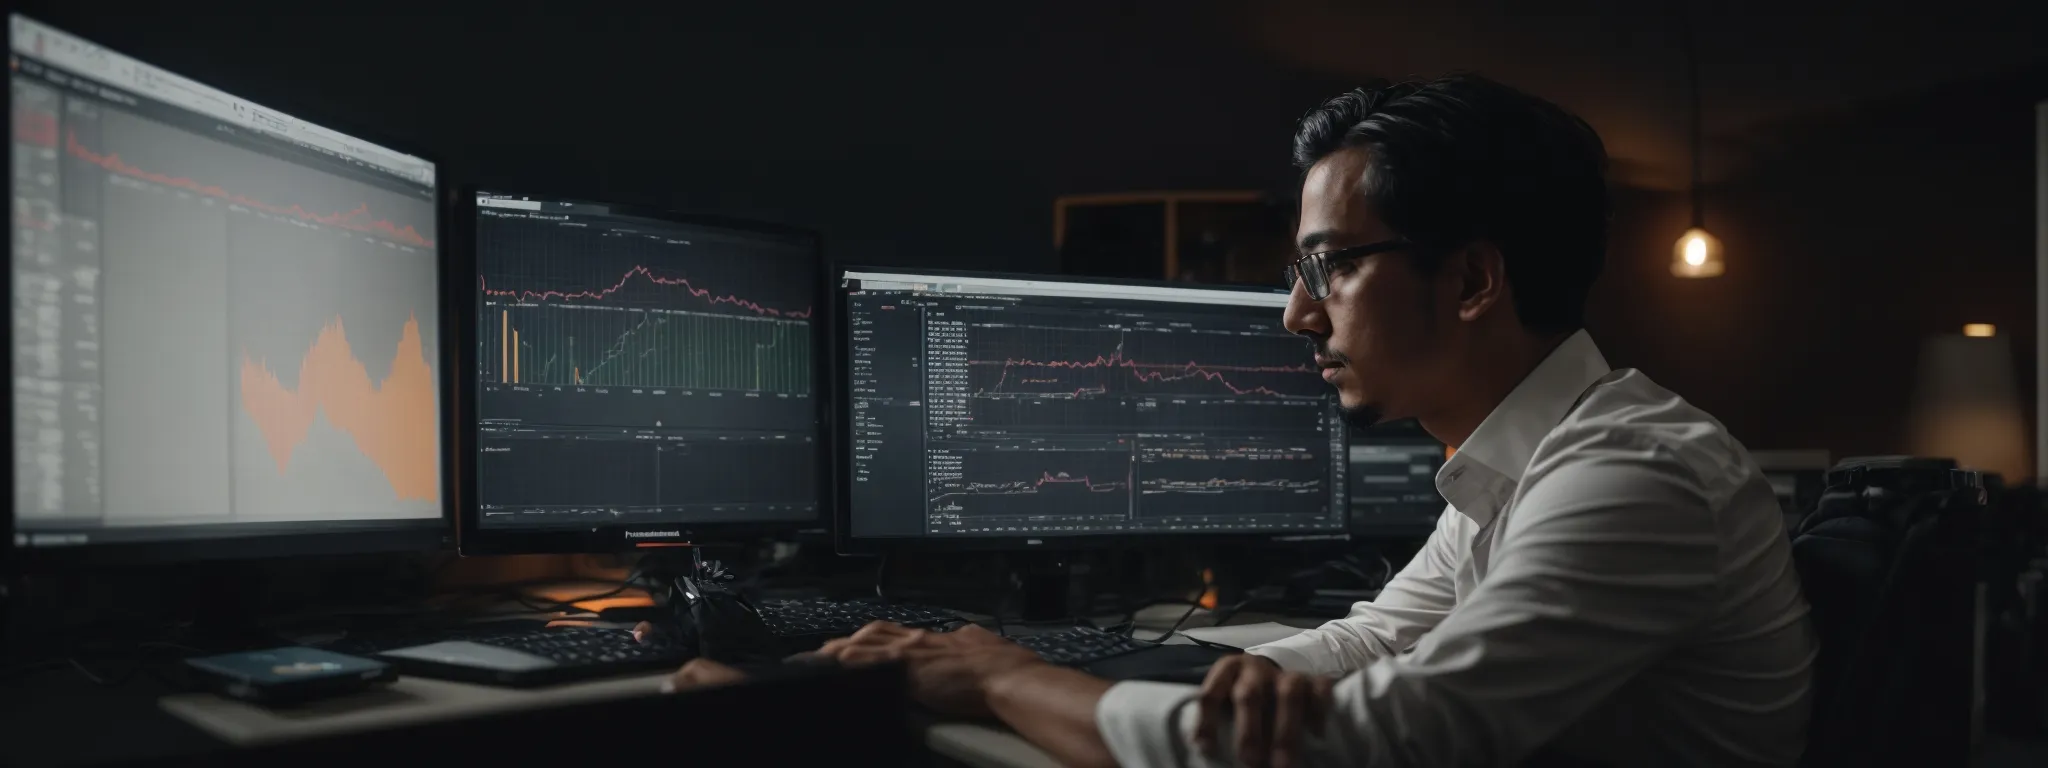 a developer looking intently at a computer screen with analytical graphs showing website performance metrics.